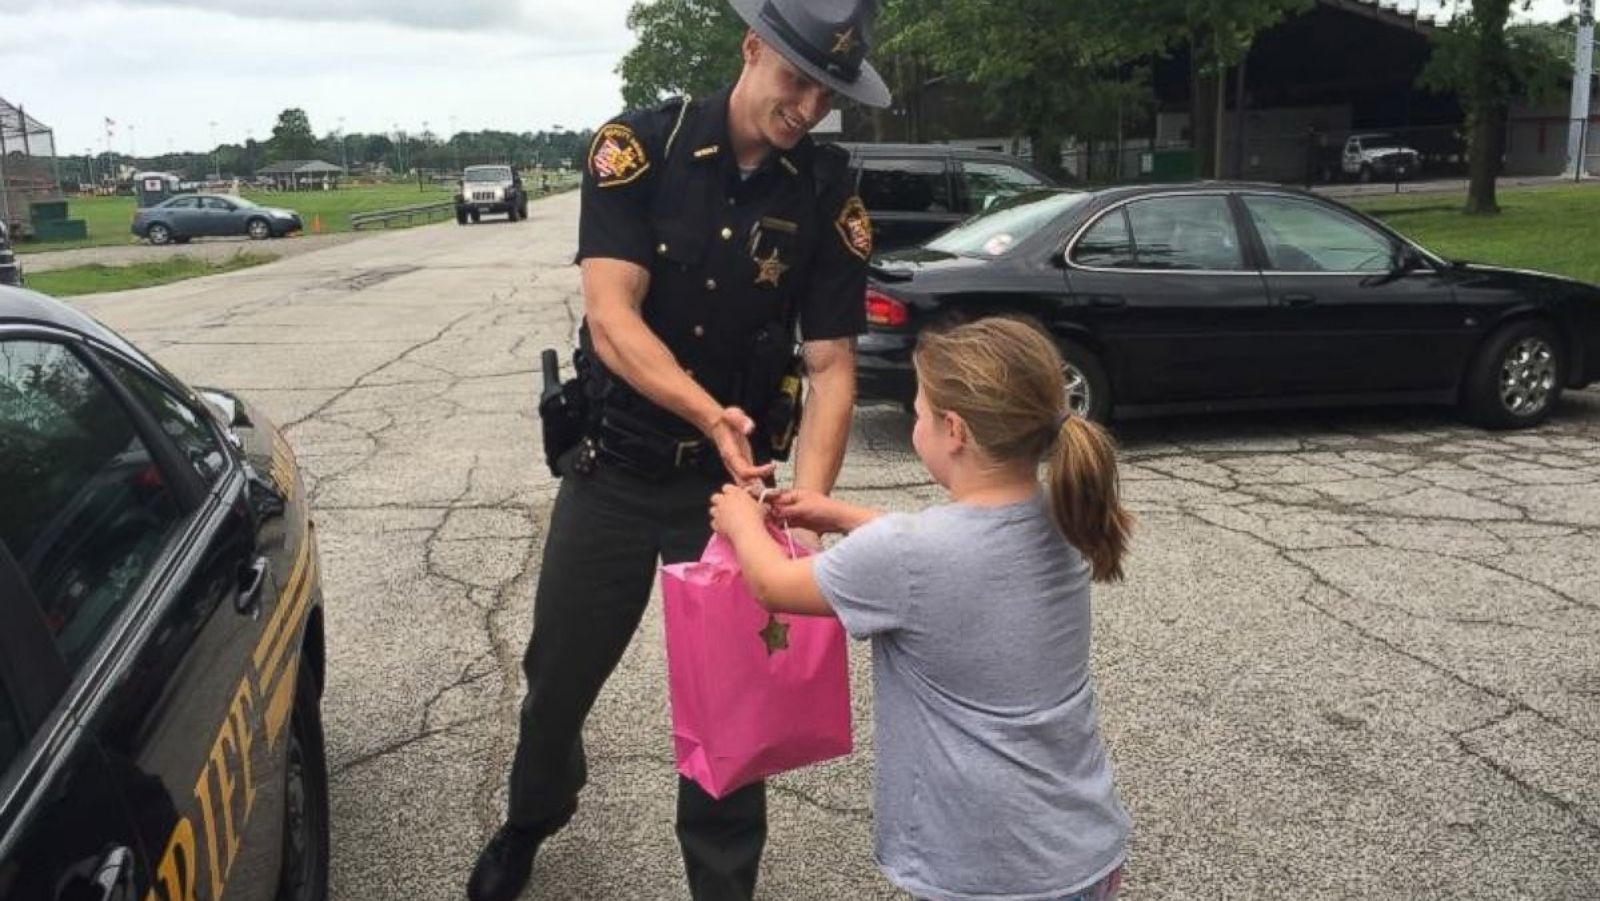 Officer Surprises 9-Year-Old Running Lemonade Stand With Tablet - ABC News